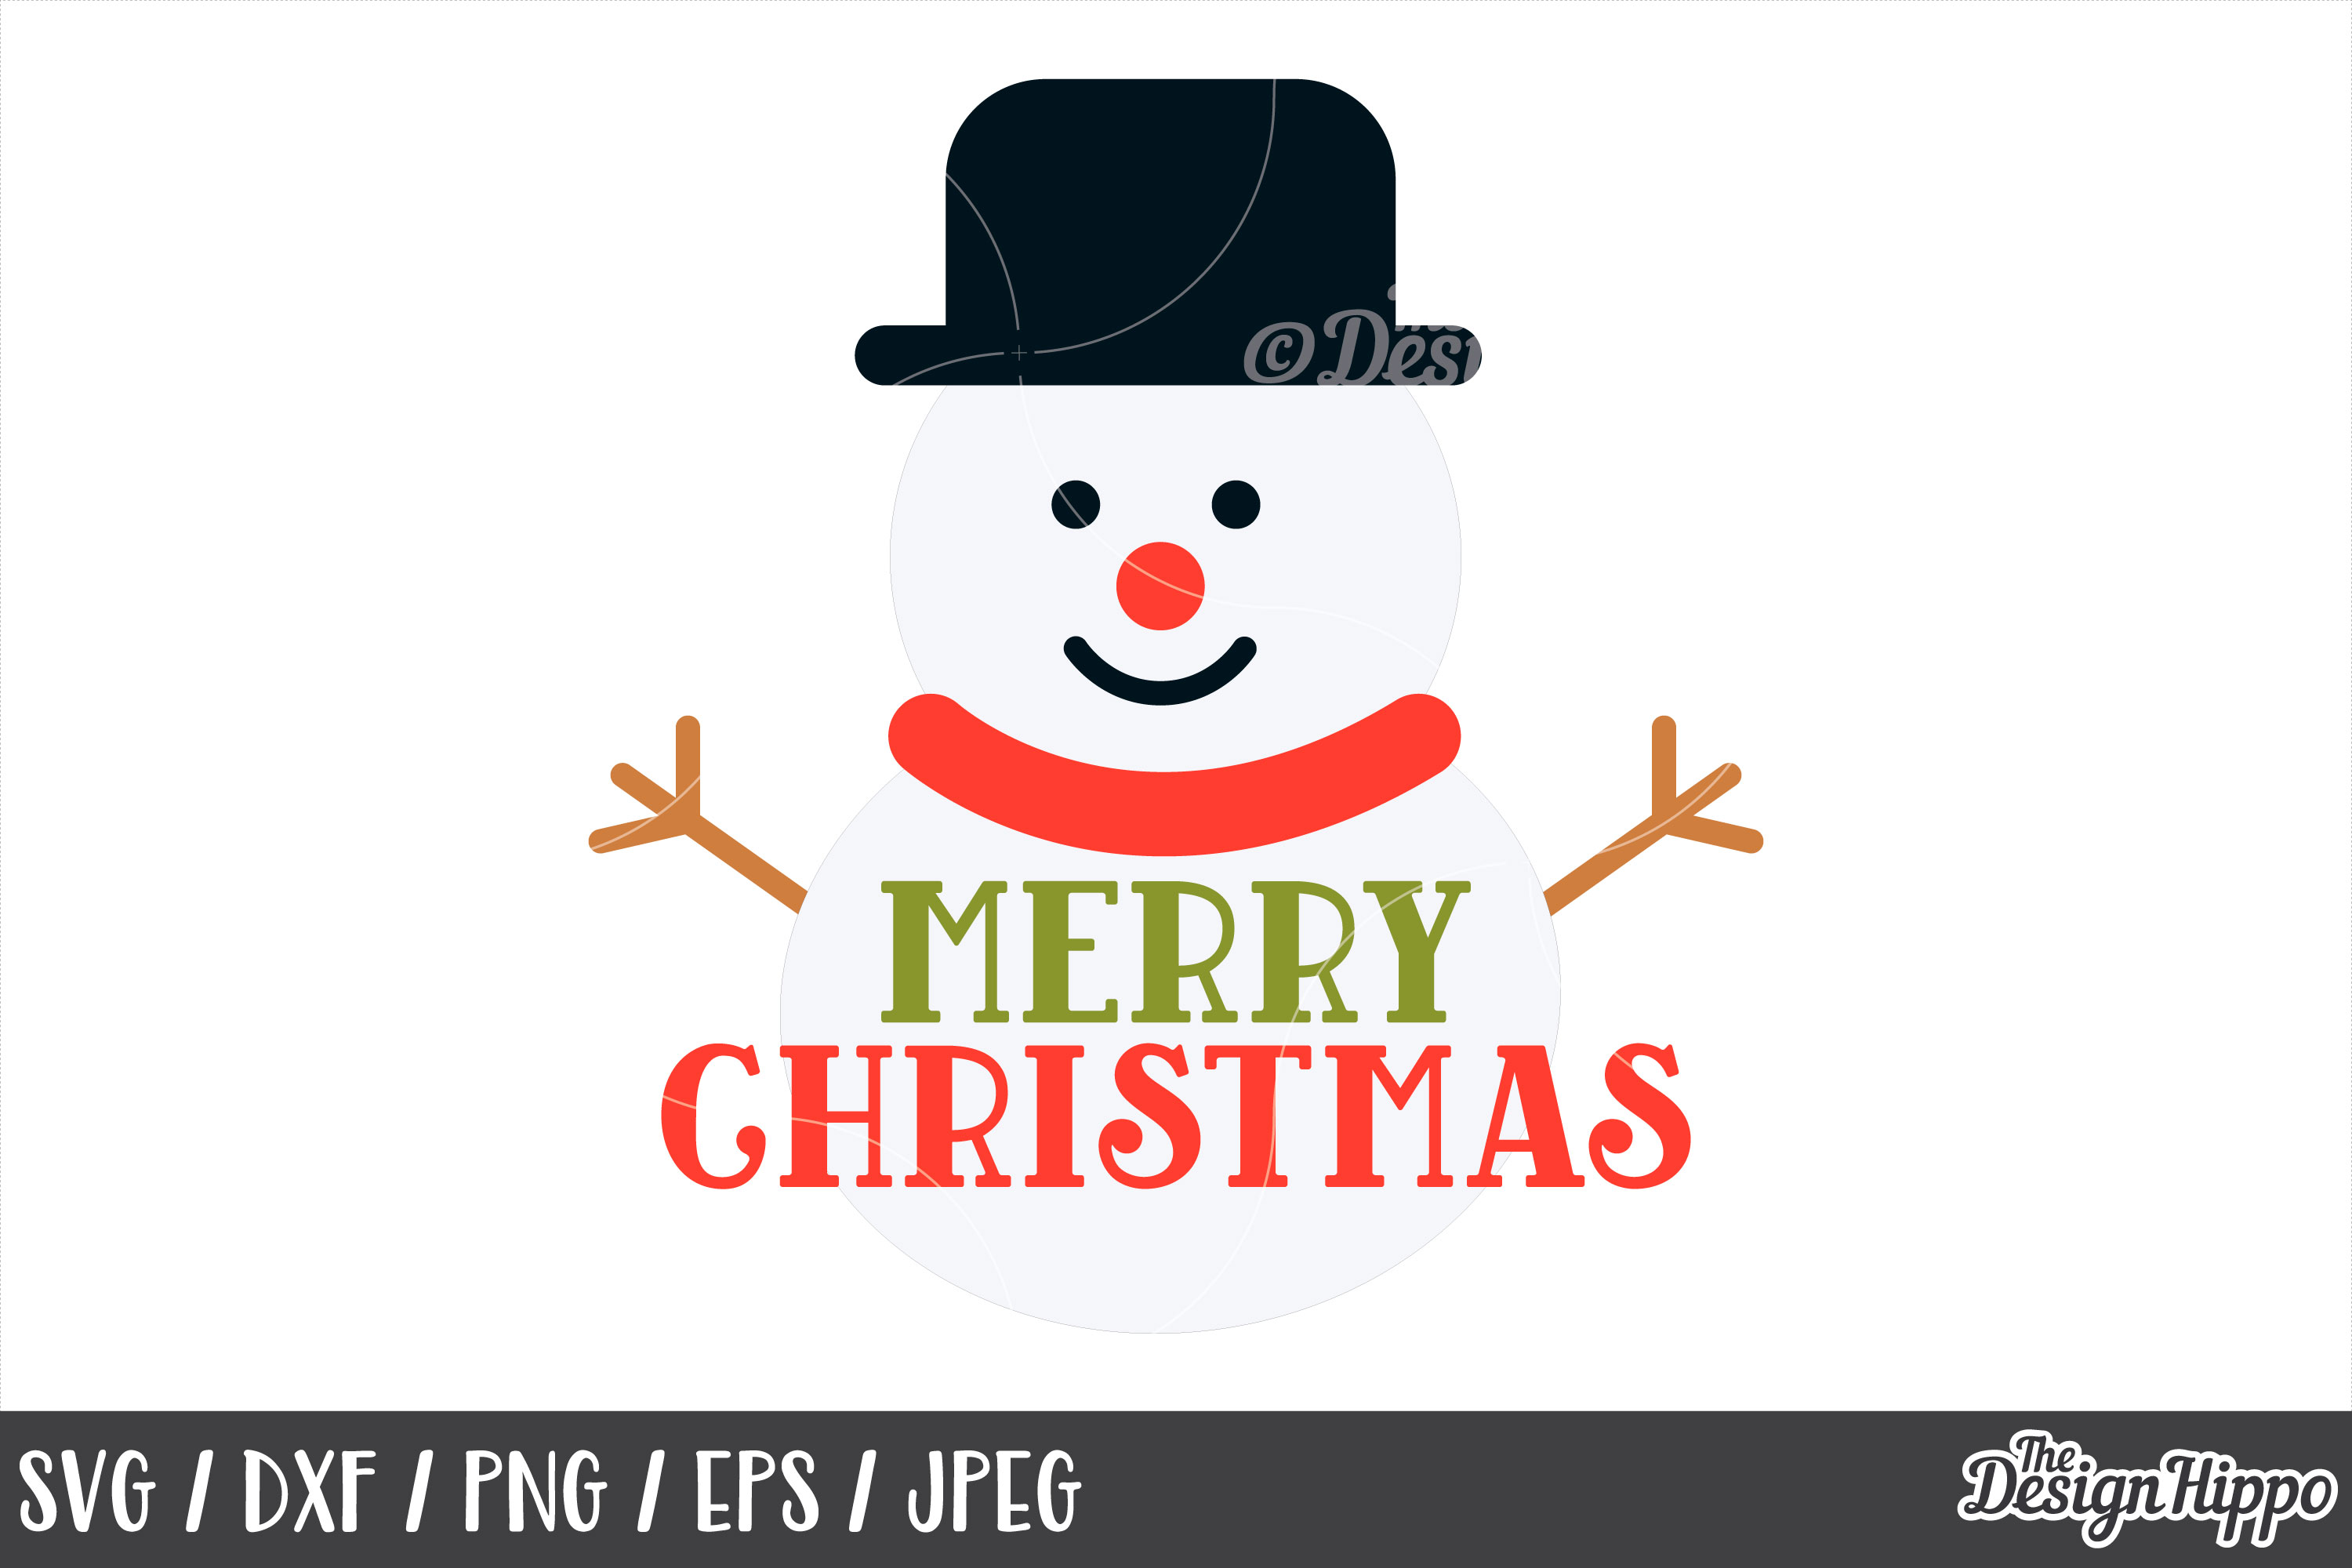 Download Christmas Snowman, Merry Christmas SVG, PNG, DXF, Cut Files